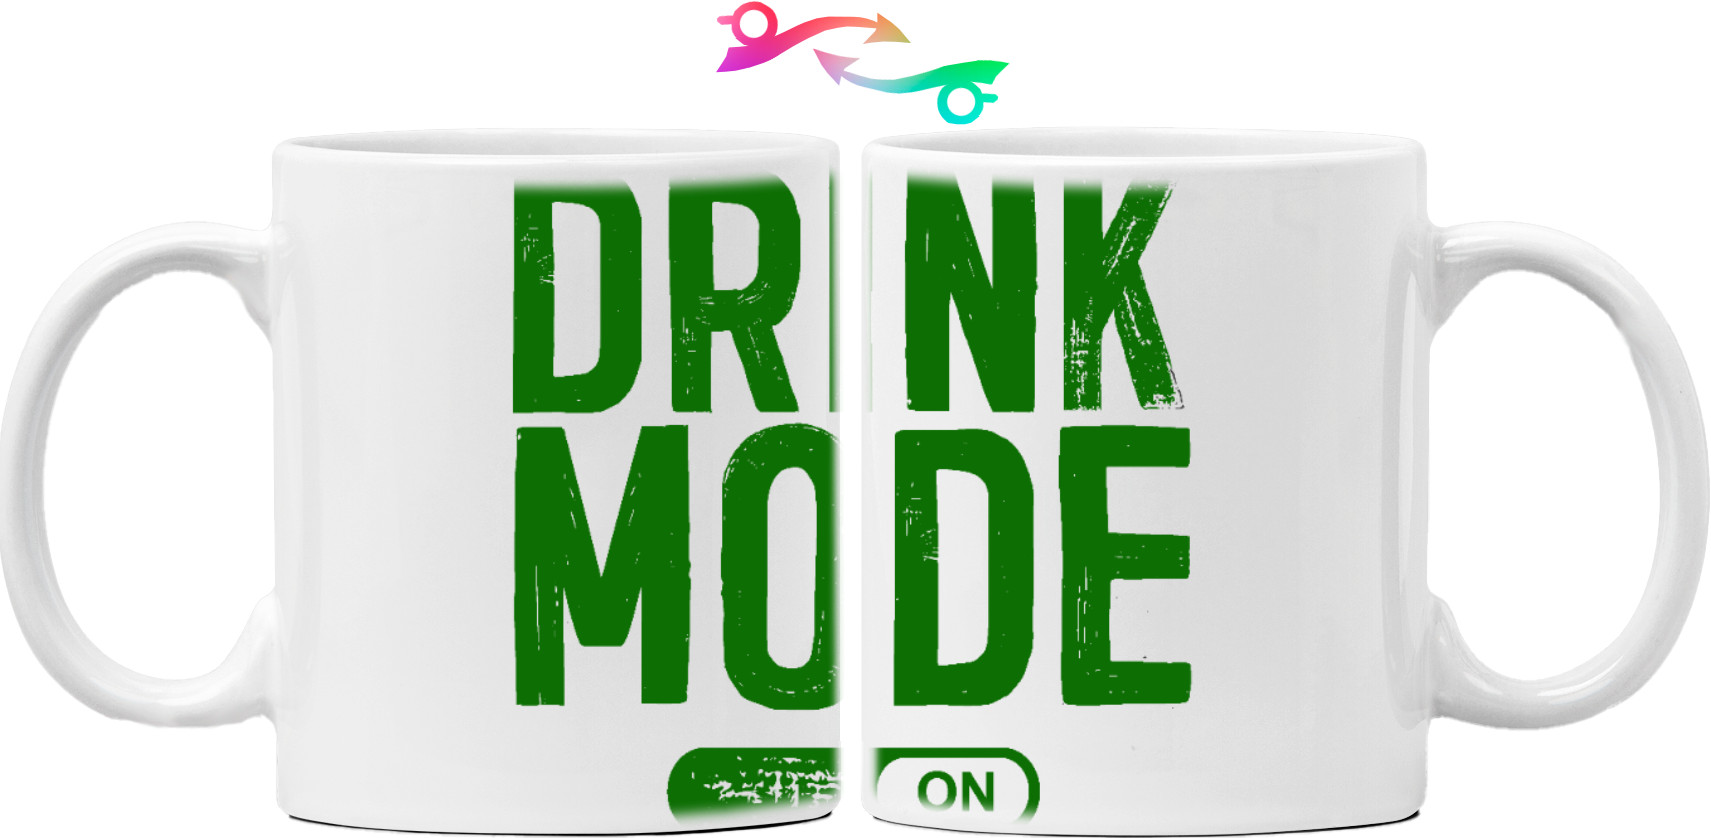 Drink mode enabled